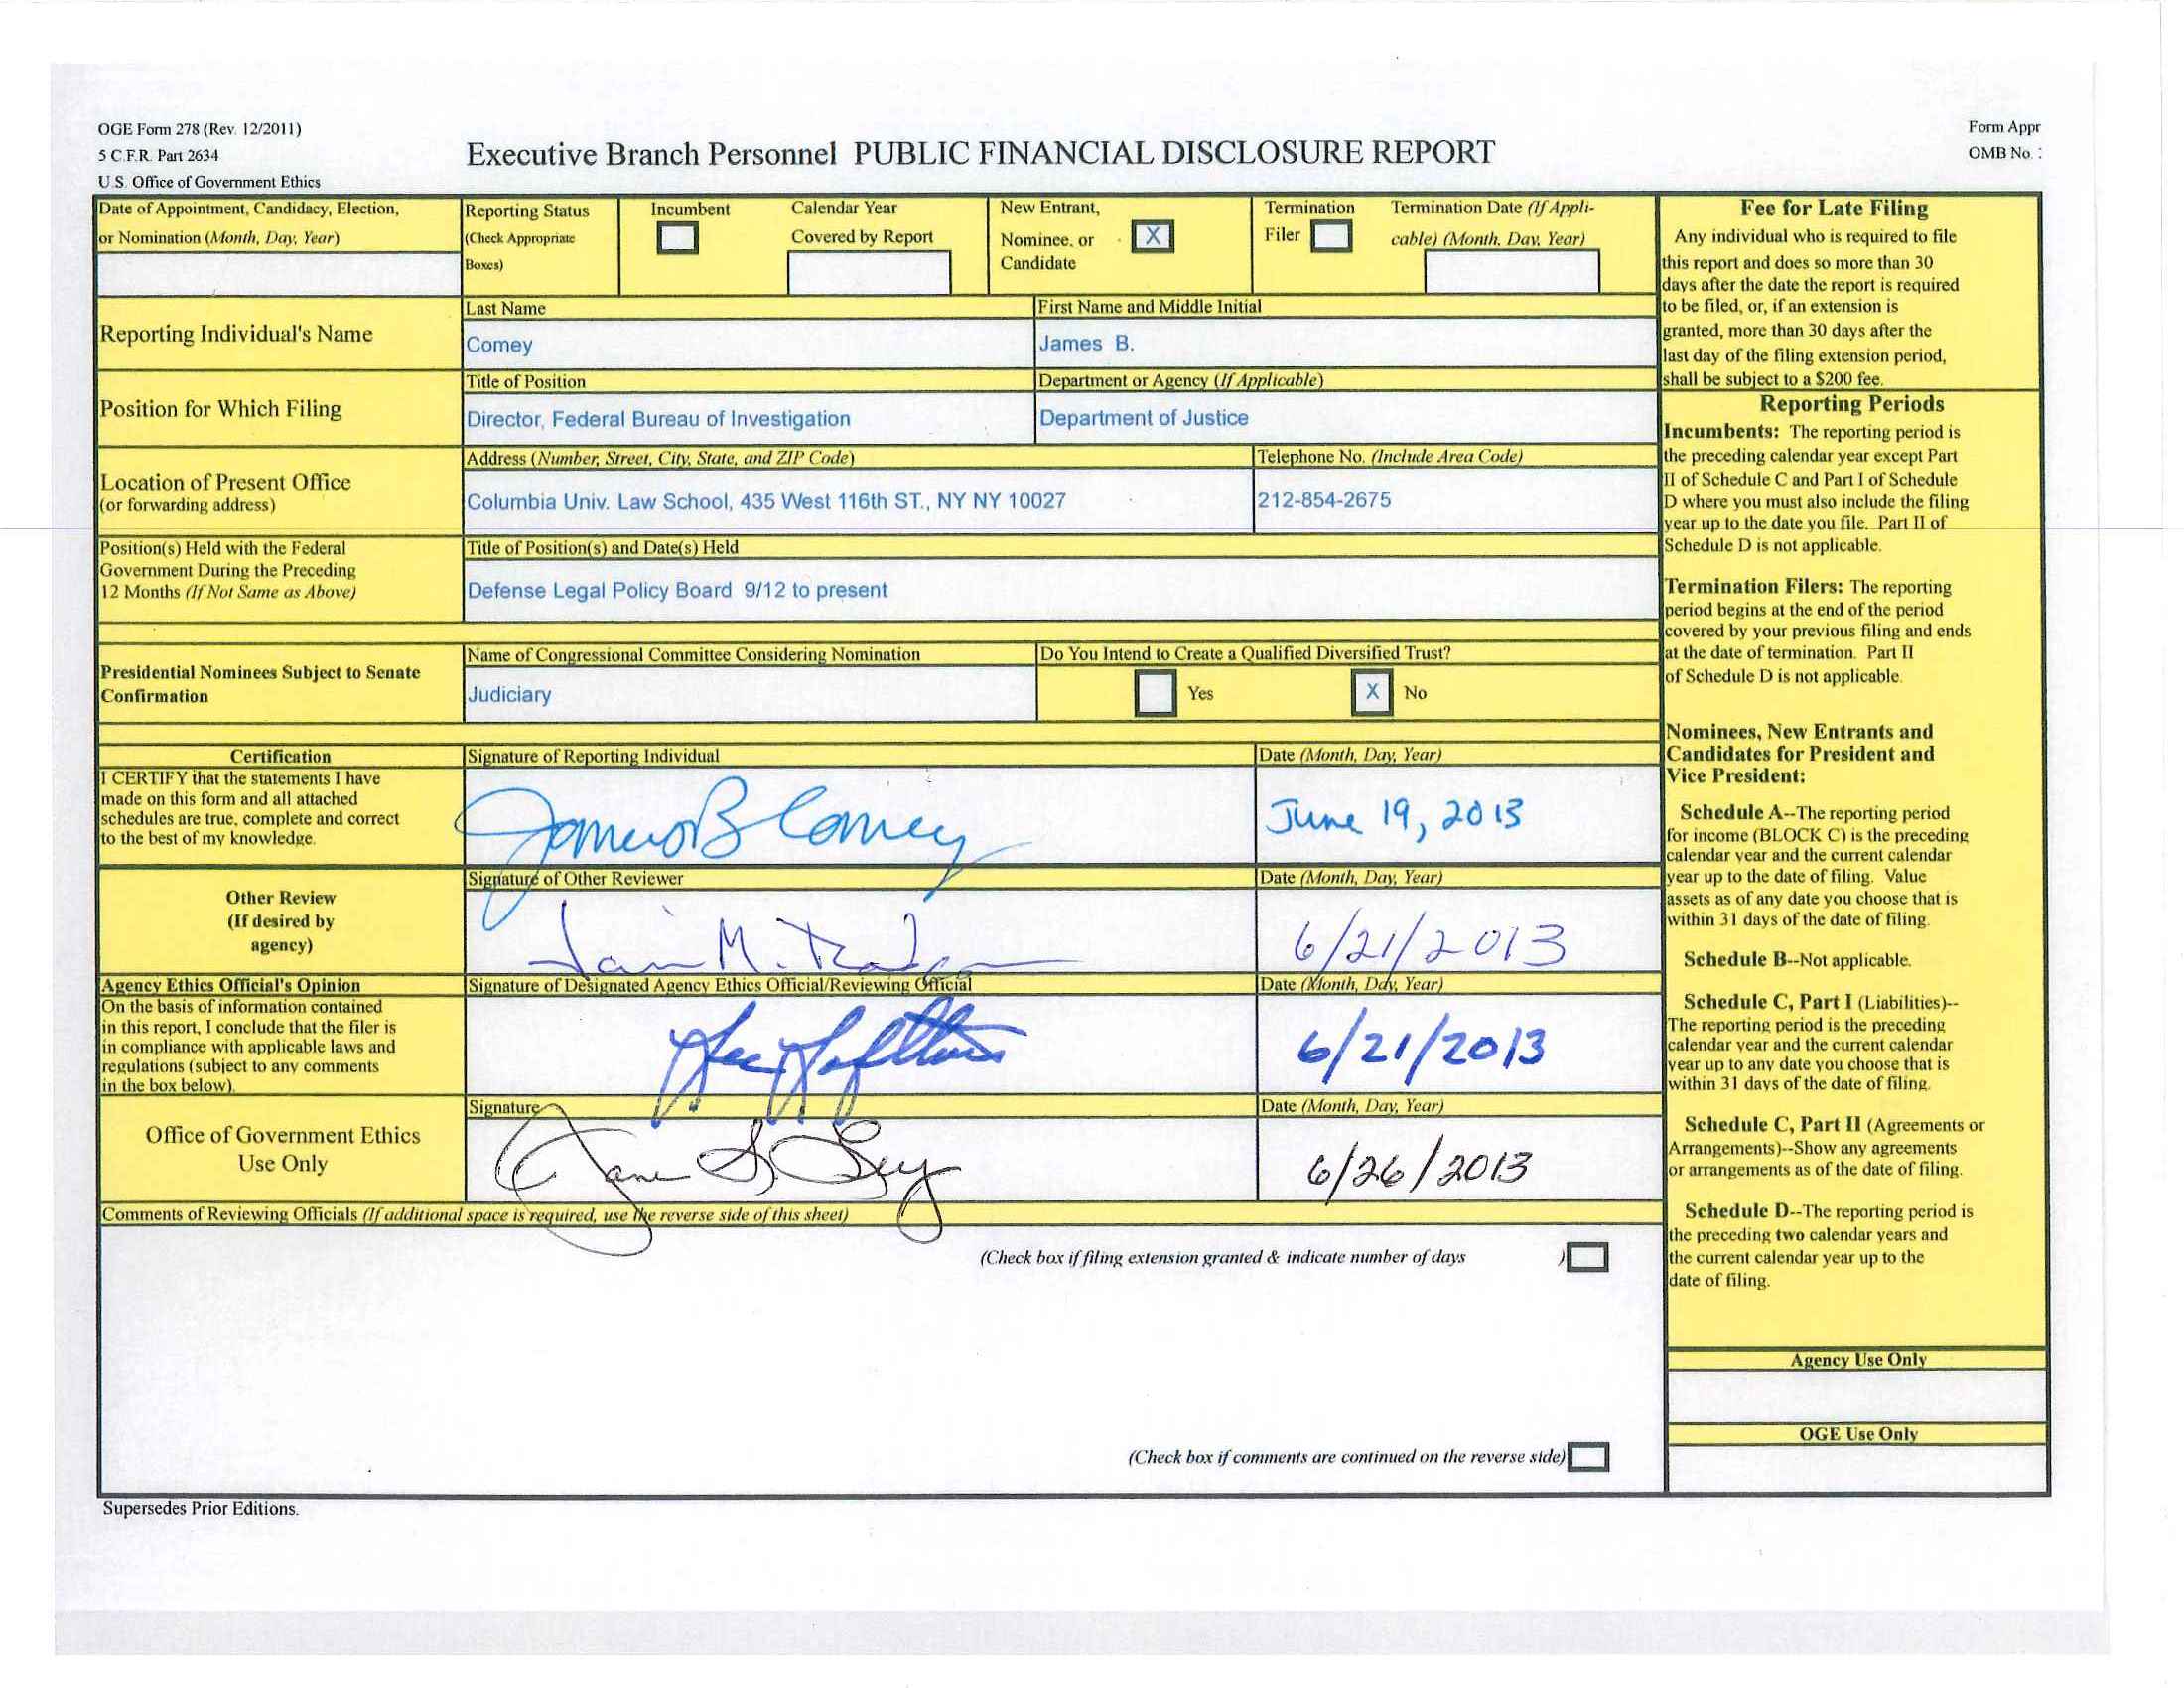 James-B-Comey-2013Form278NewEntrant_Page_01.jpg